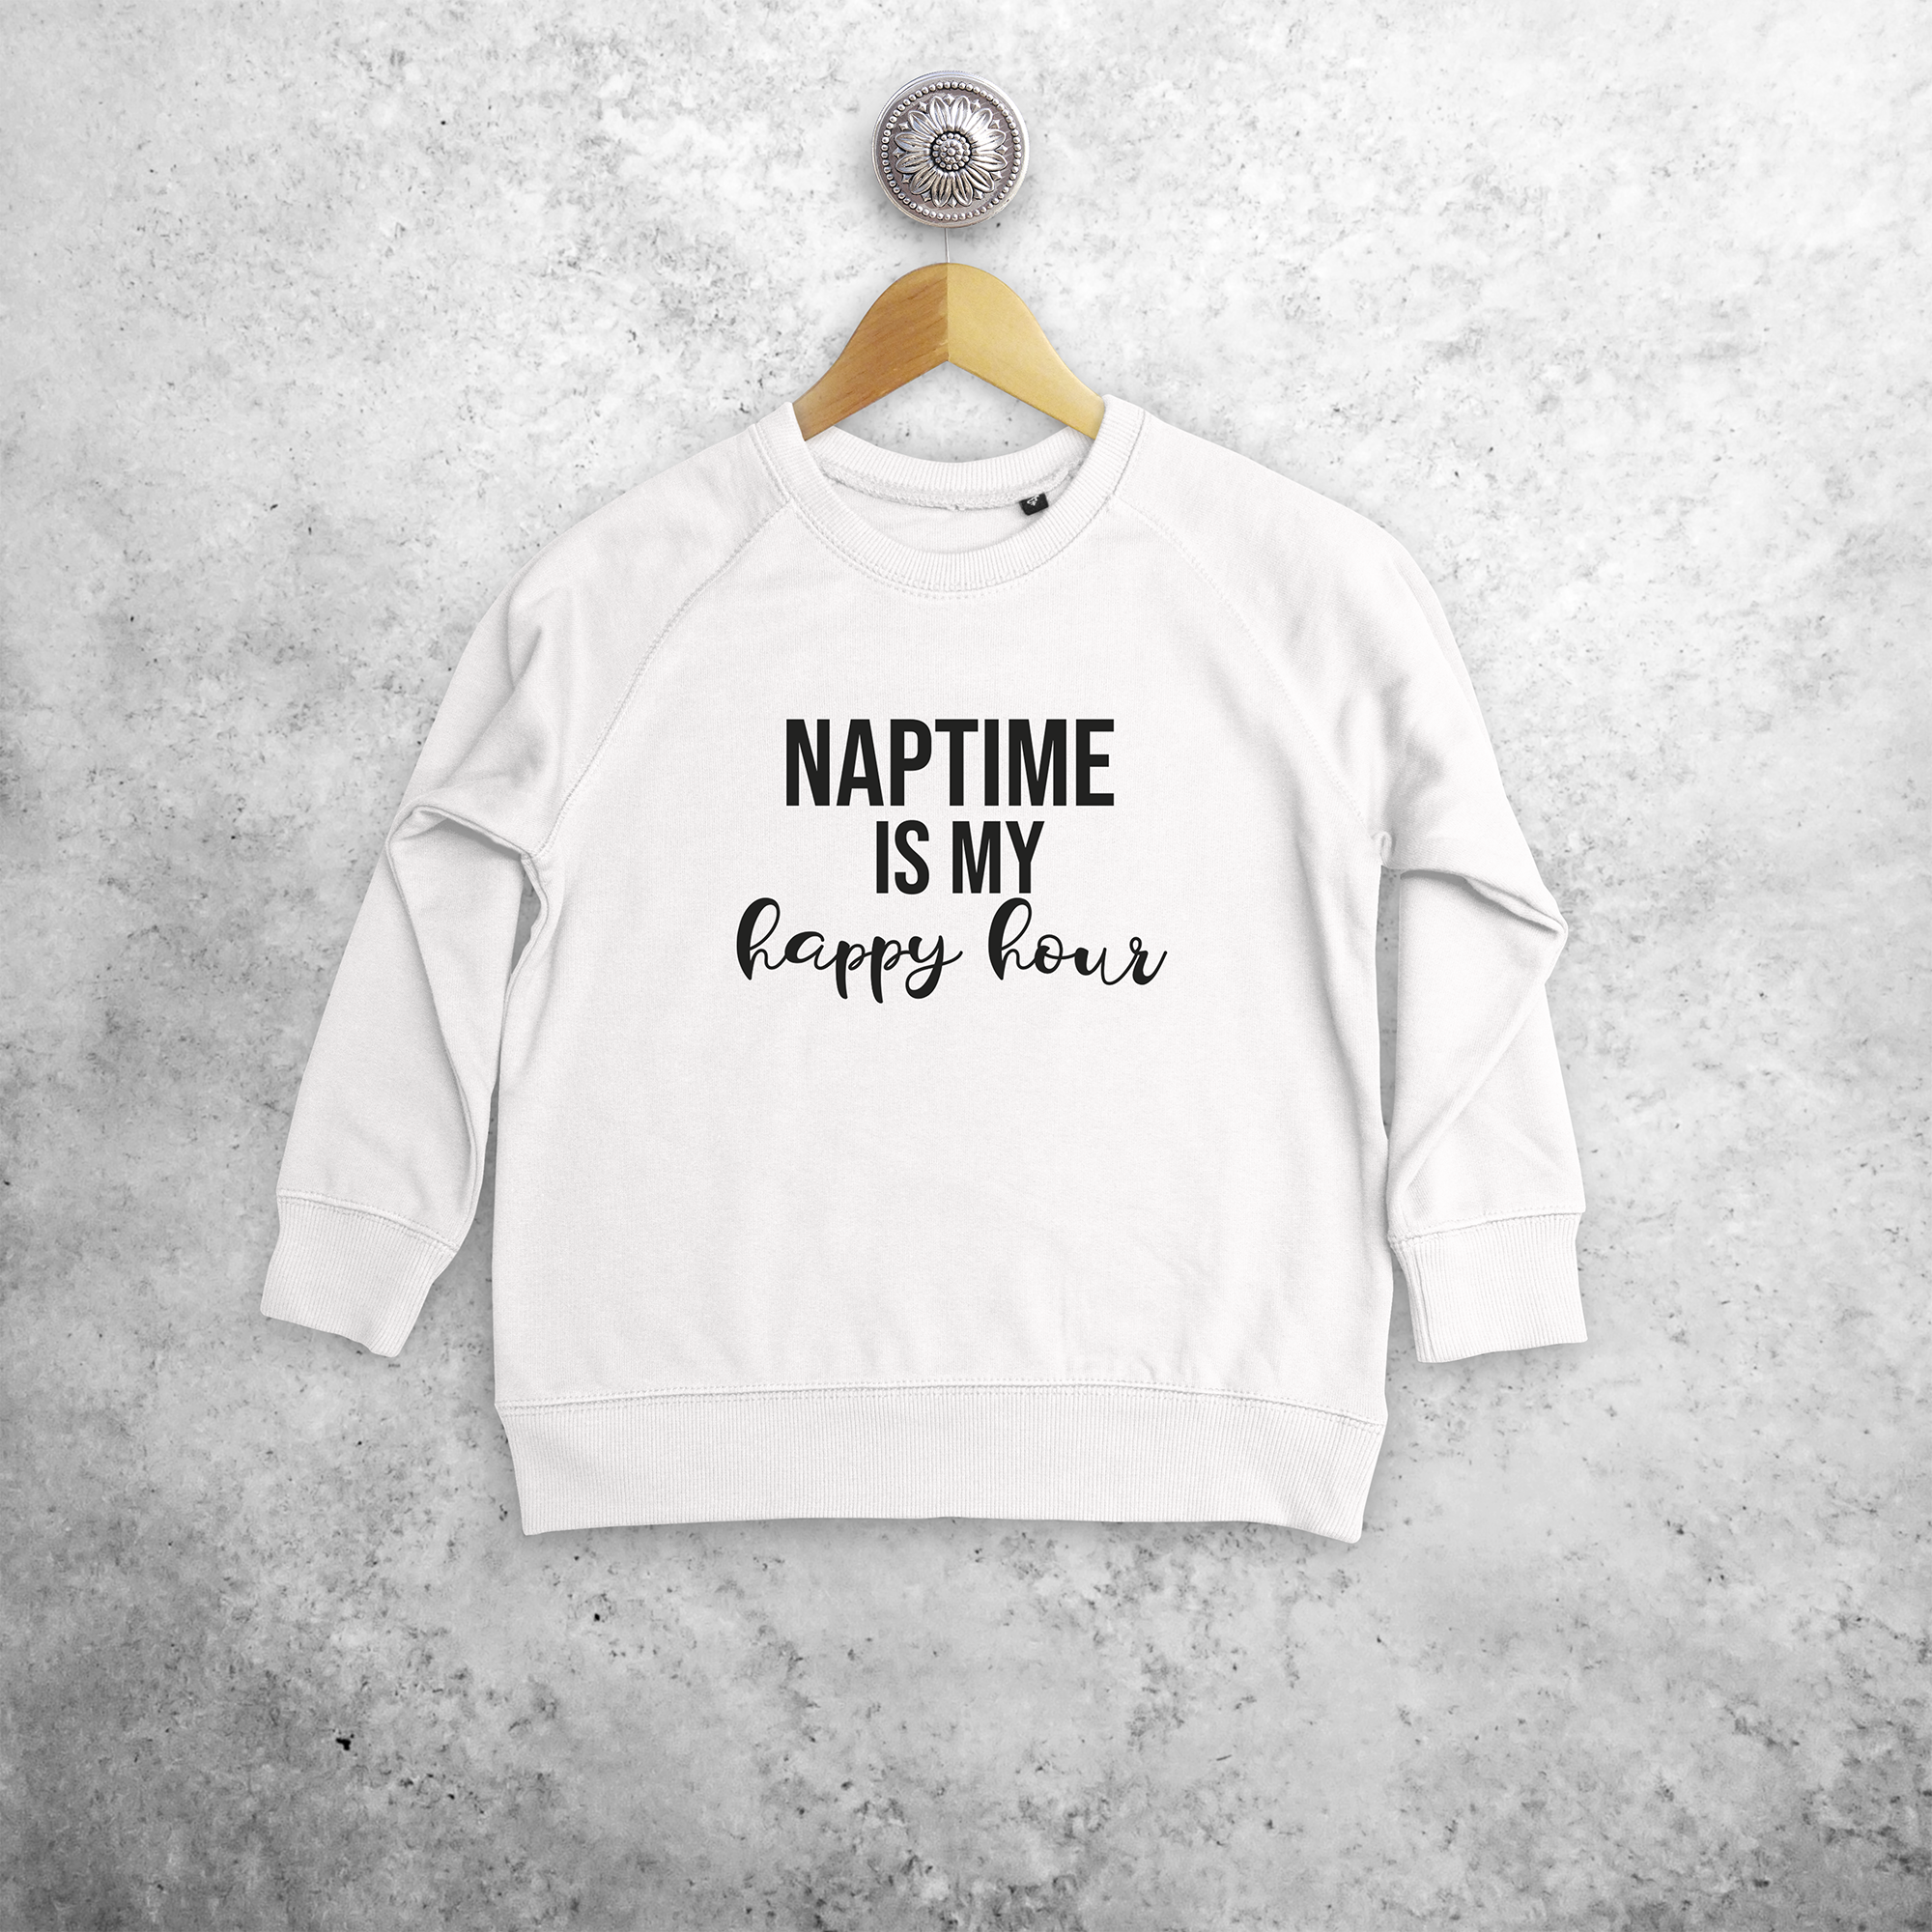 'Naptime is my happy hour' kids sweater